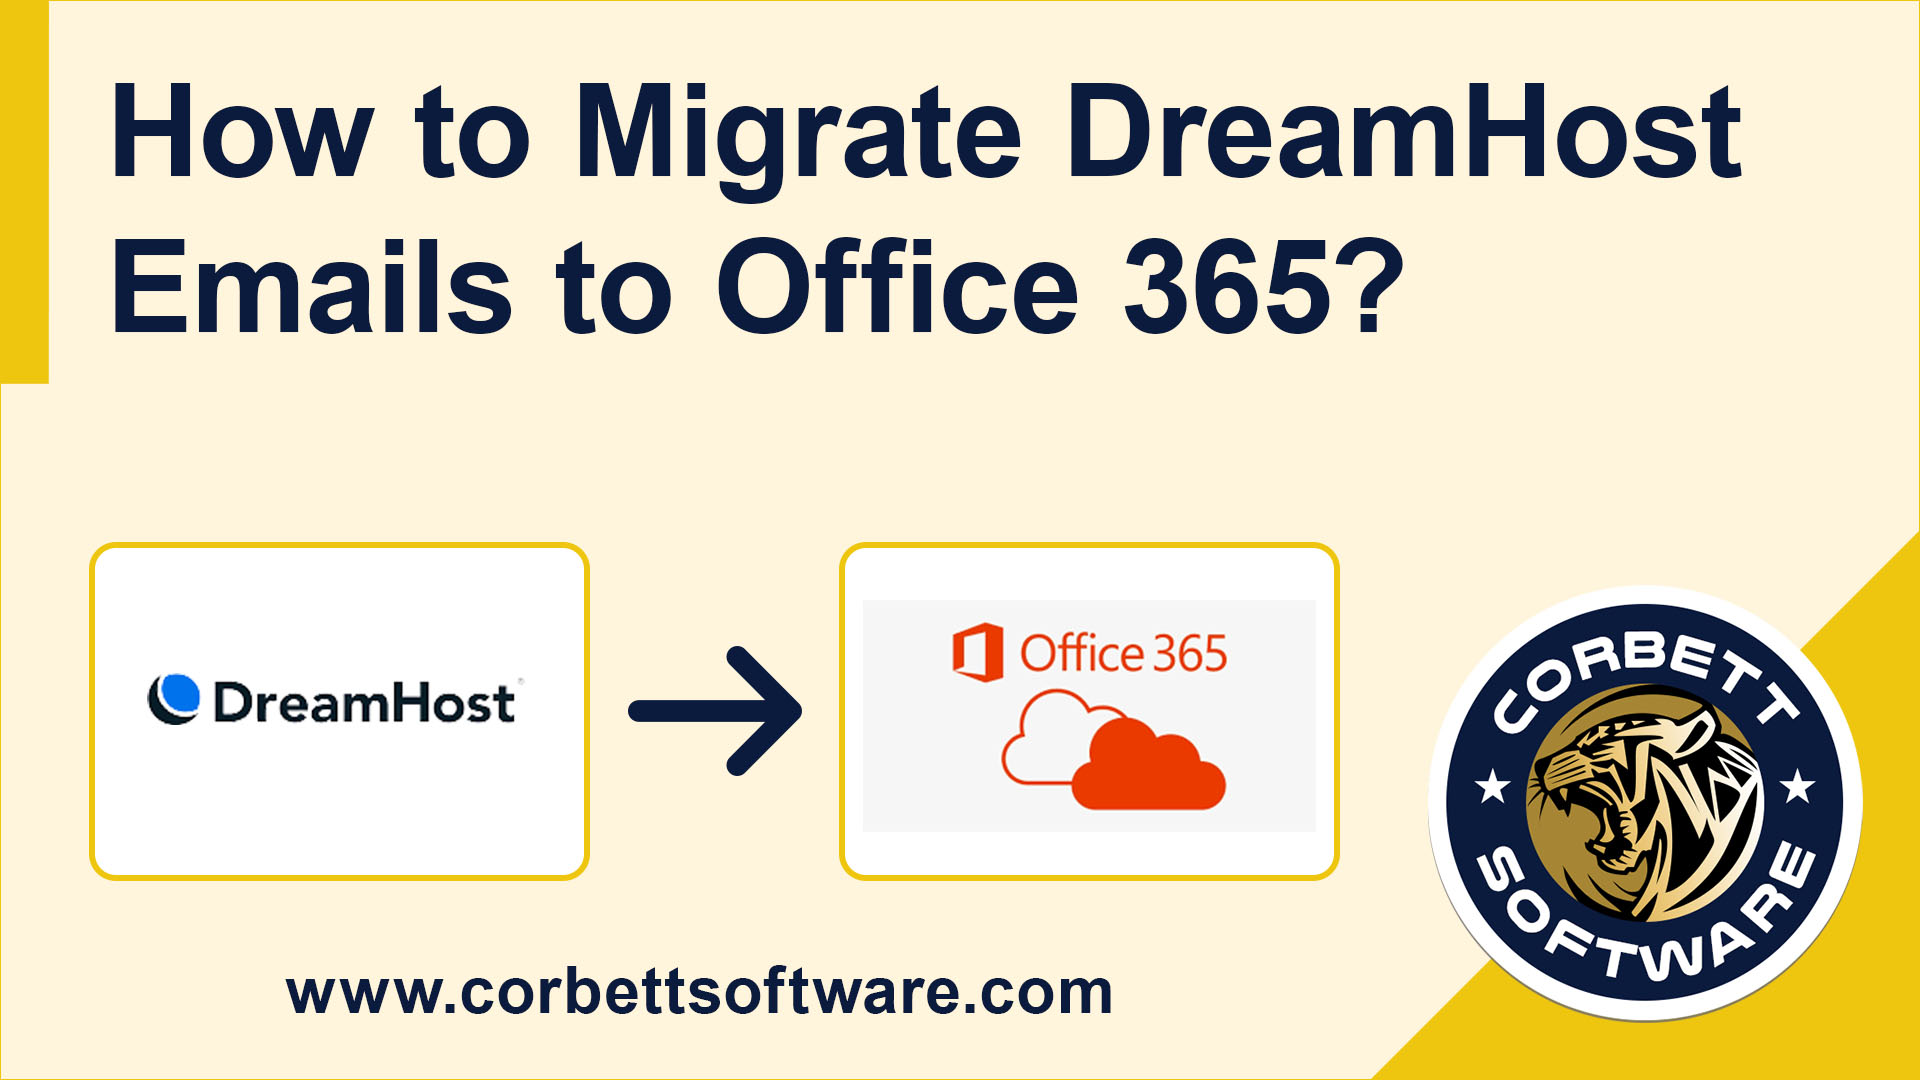 Migrate DreamHost Emails to Office 365